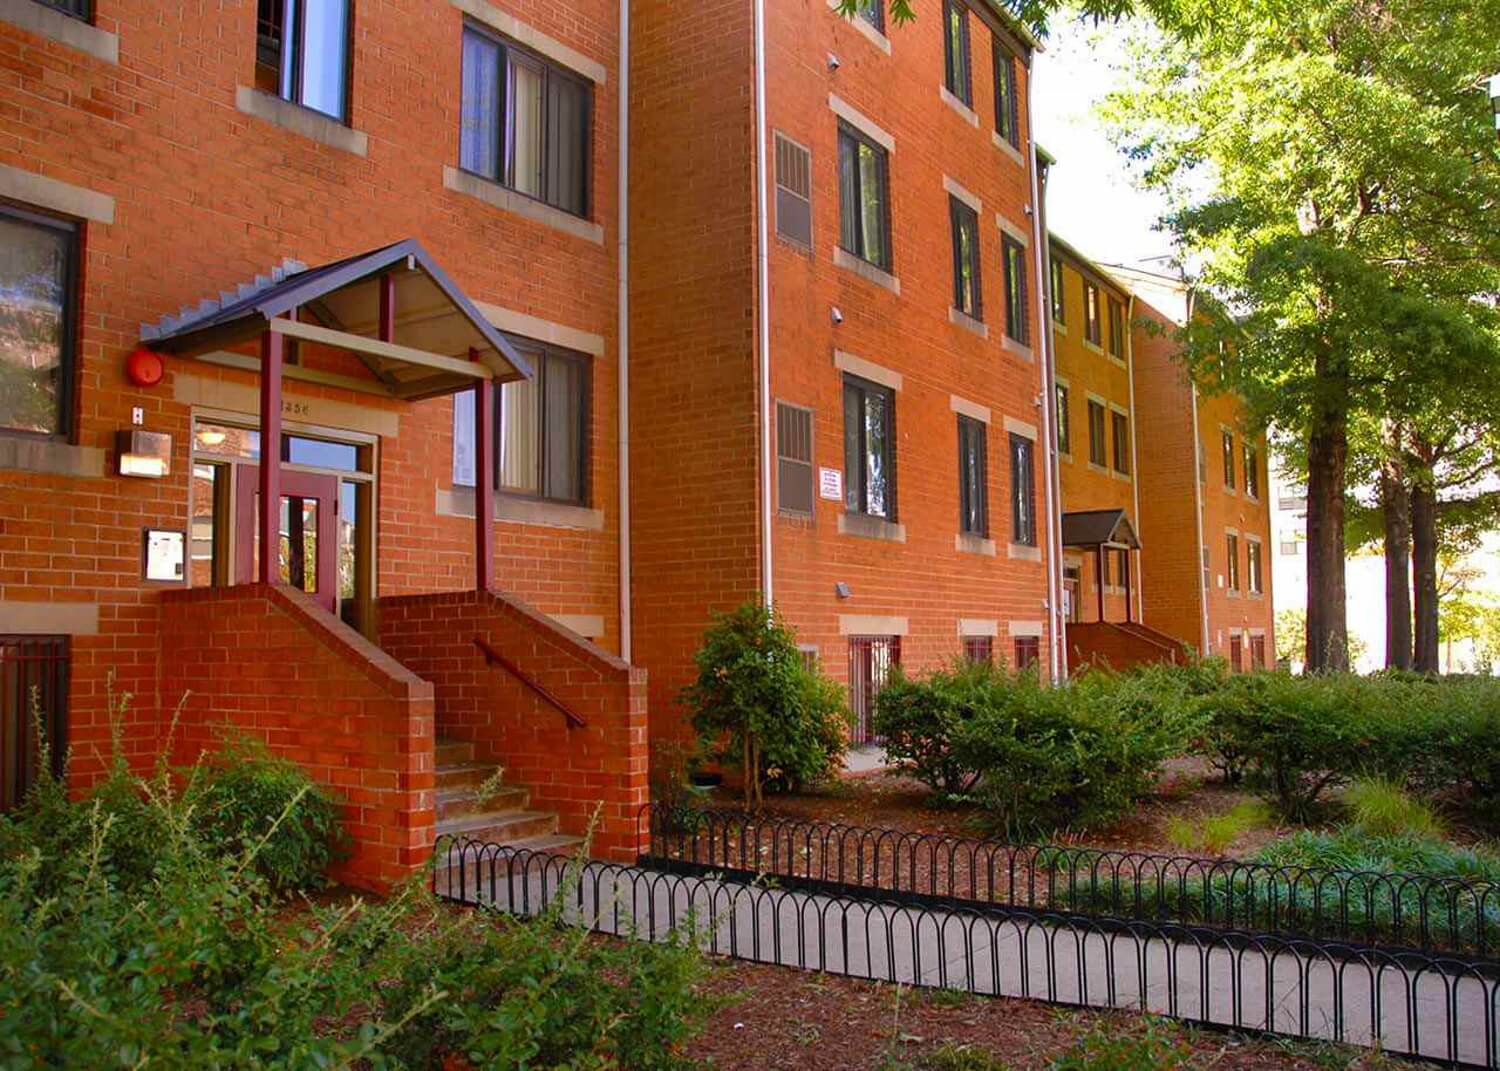 DC Affordability, Sustainability Project Secures $2M Pre-Development Loan